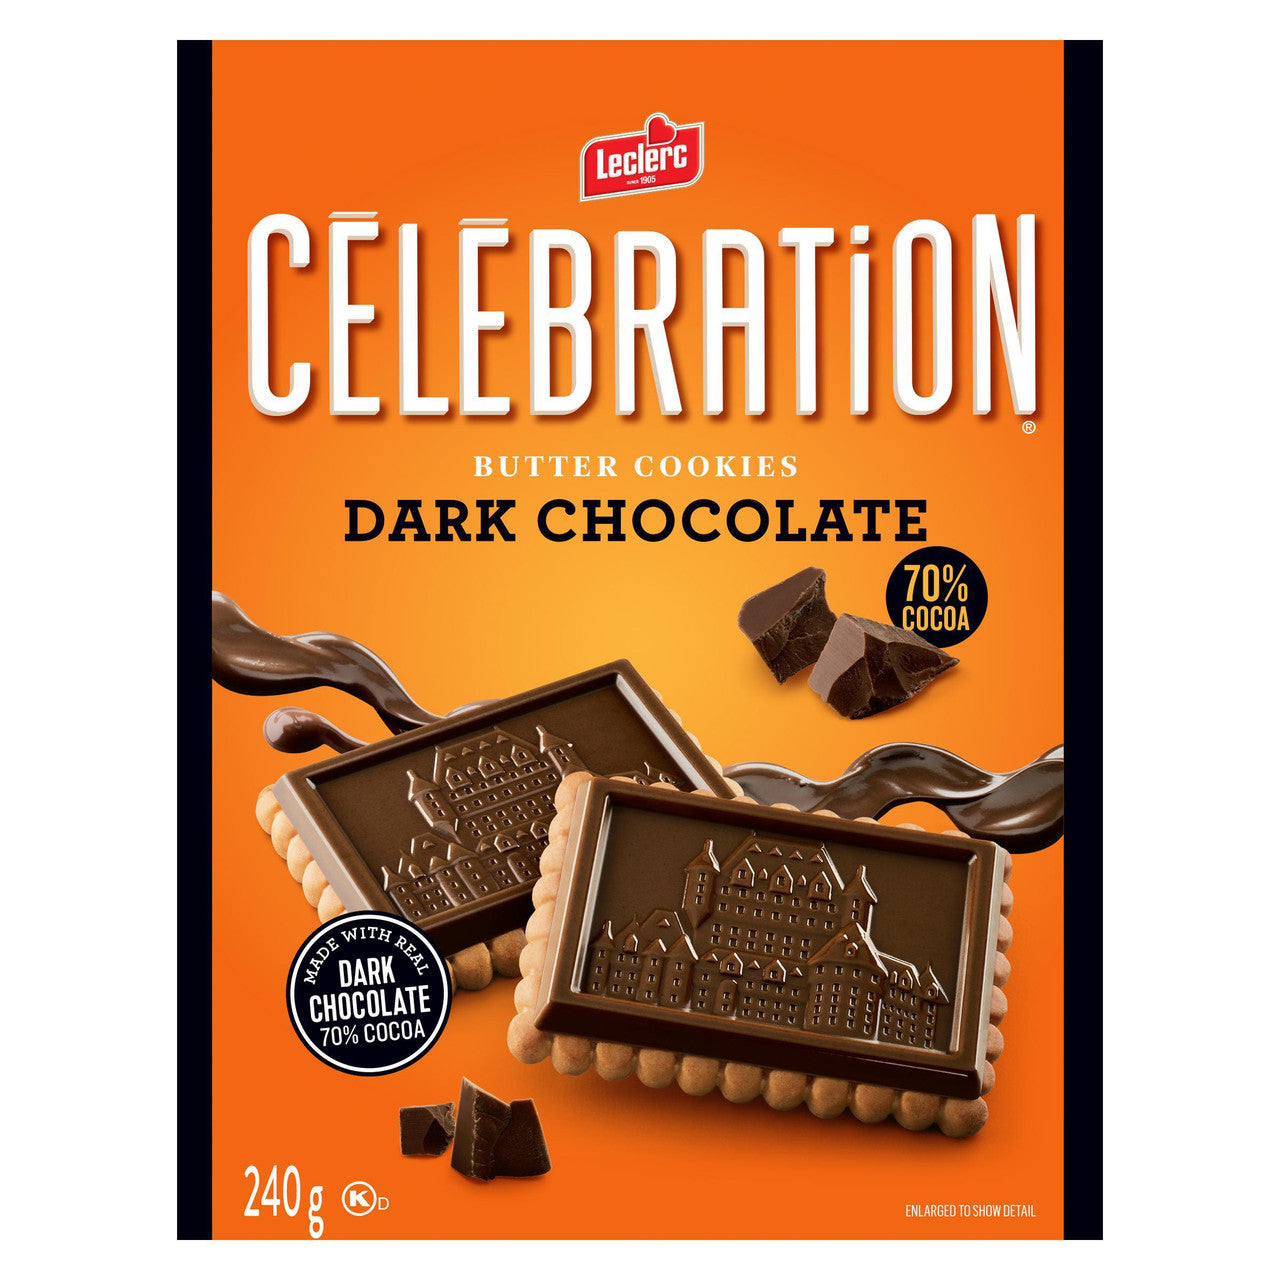 Leclerc Celebration Dark Chocolate 70% Cocoa Butter Cookies, 240g/8.5 oz. Box {Imported from Canada}